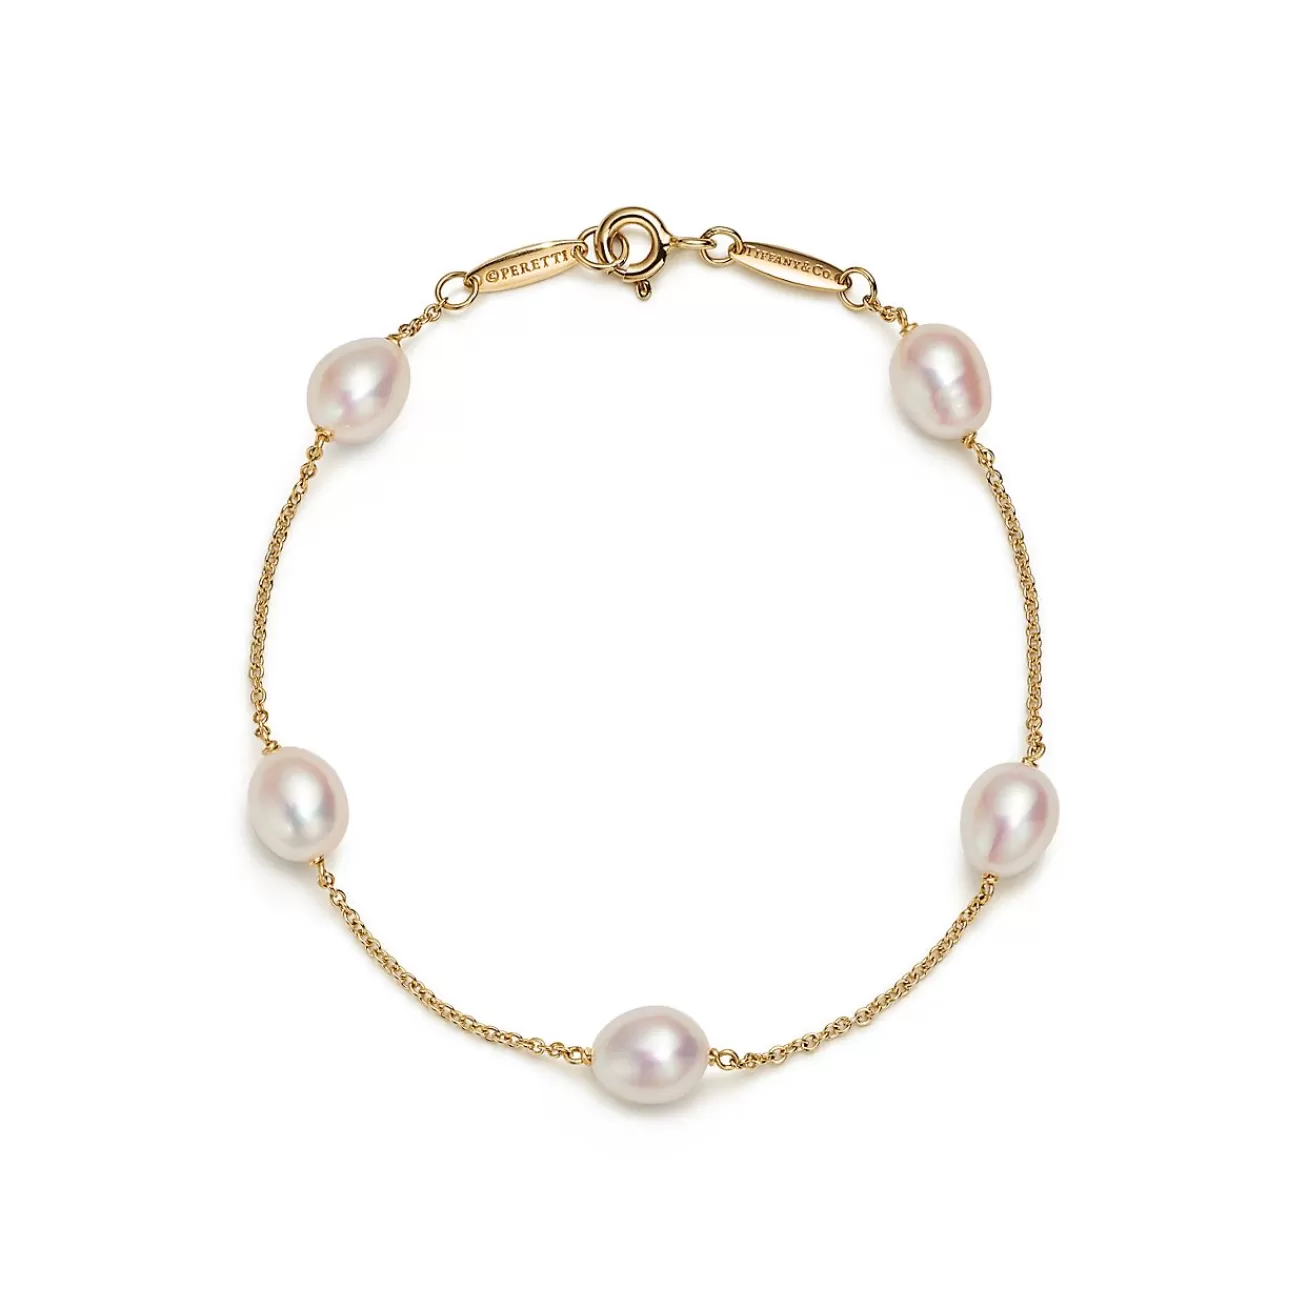 Tiffany & Co. Elsa Peretti® Pearls by the Yard™ bracelet in 18k gold. | ^ Bracelets | Gifts for Her